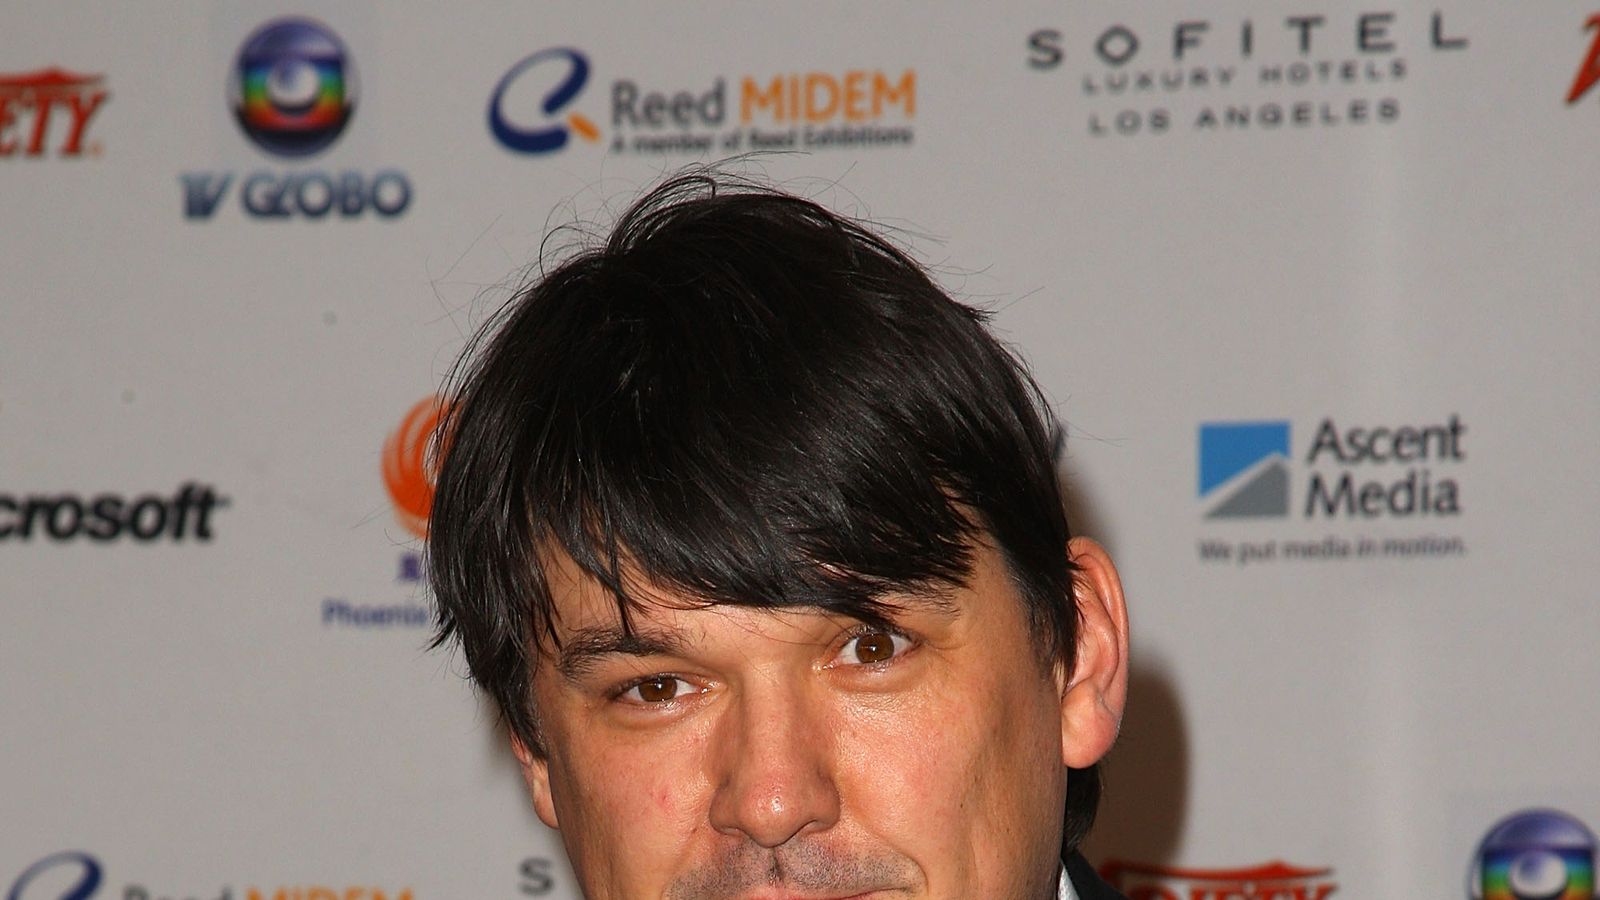 Download Father Ted co-creator Graham Linehan warned by police over ...